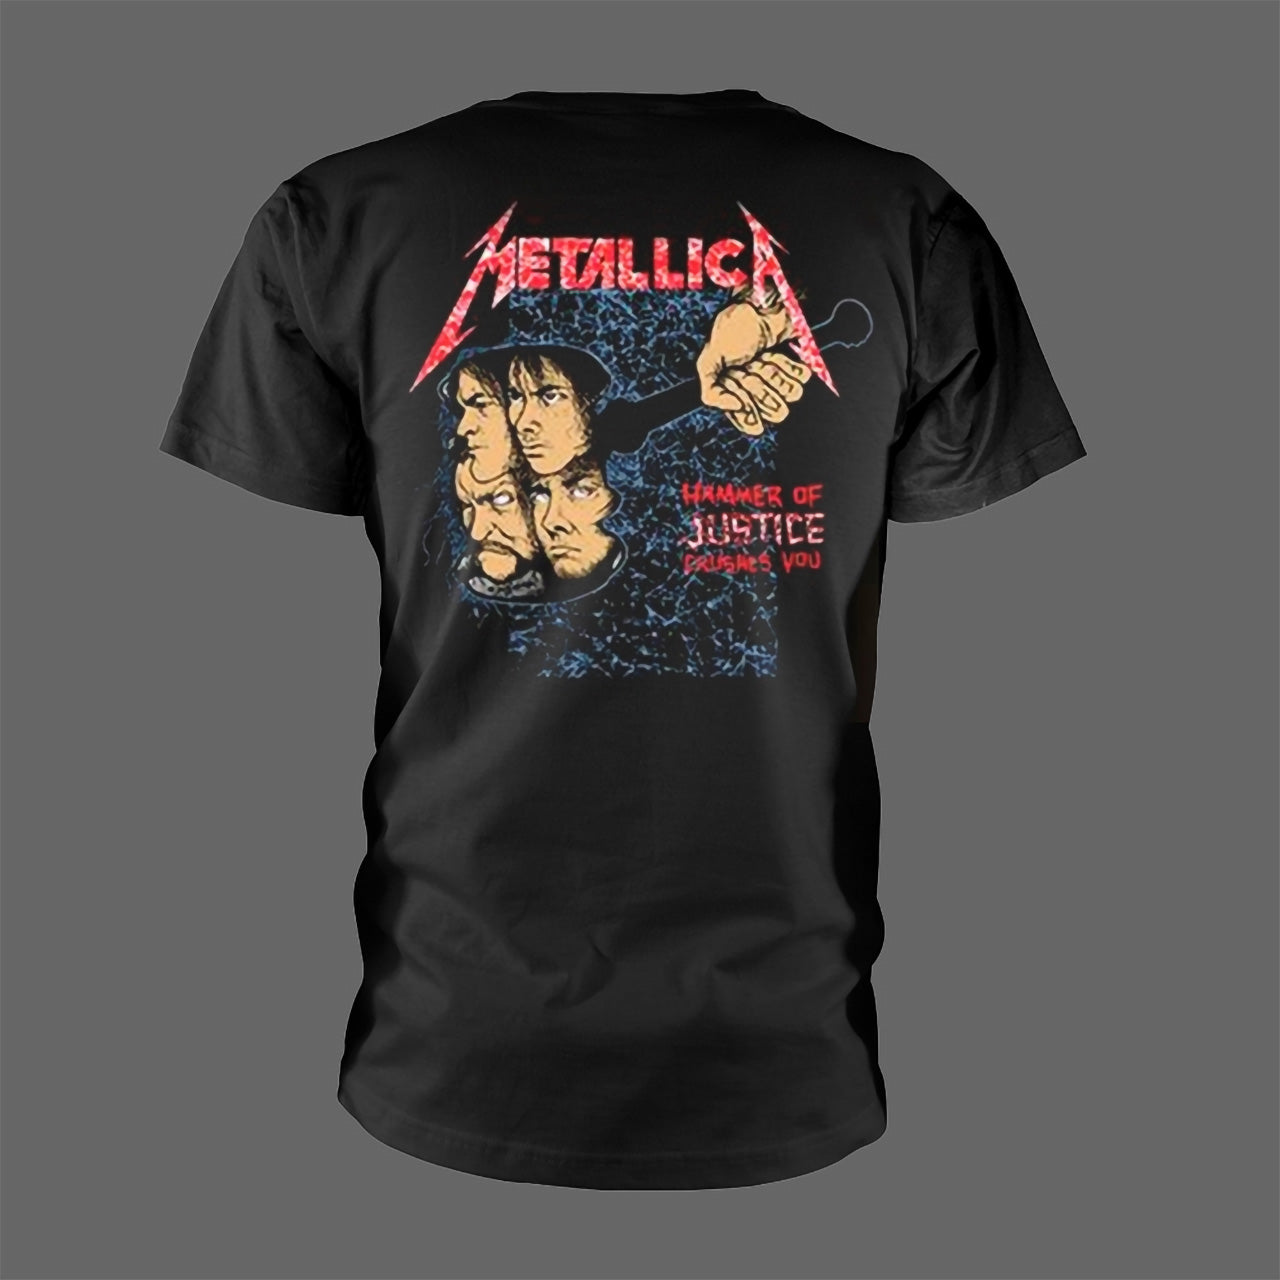 Metallica - ...And Justice for All (Green Logo) (T-Shirt)